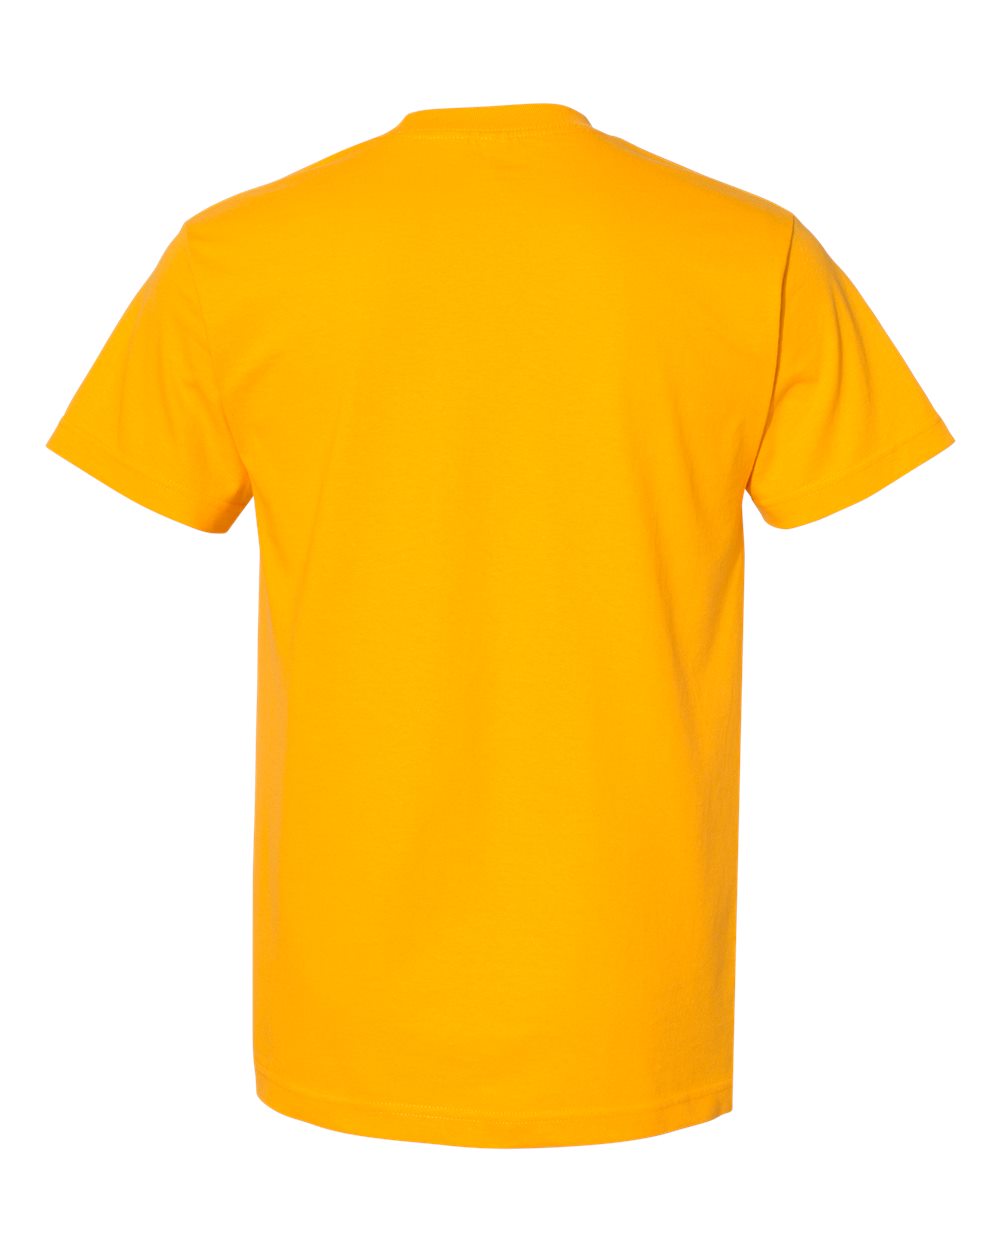 American Apparel Unisex Heavyweight Cotton Tee 1301 #color_Gold